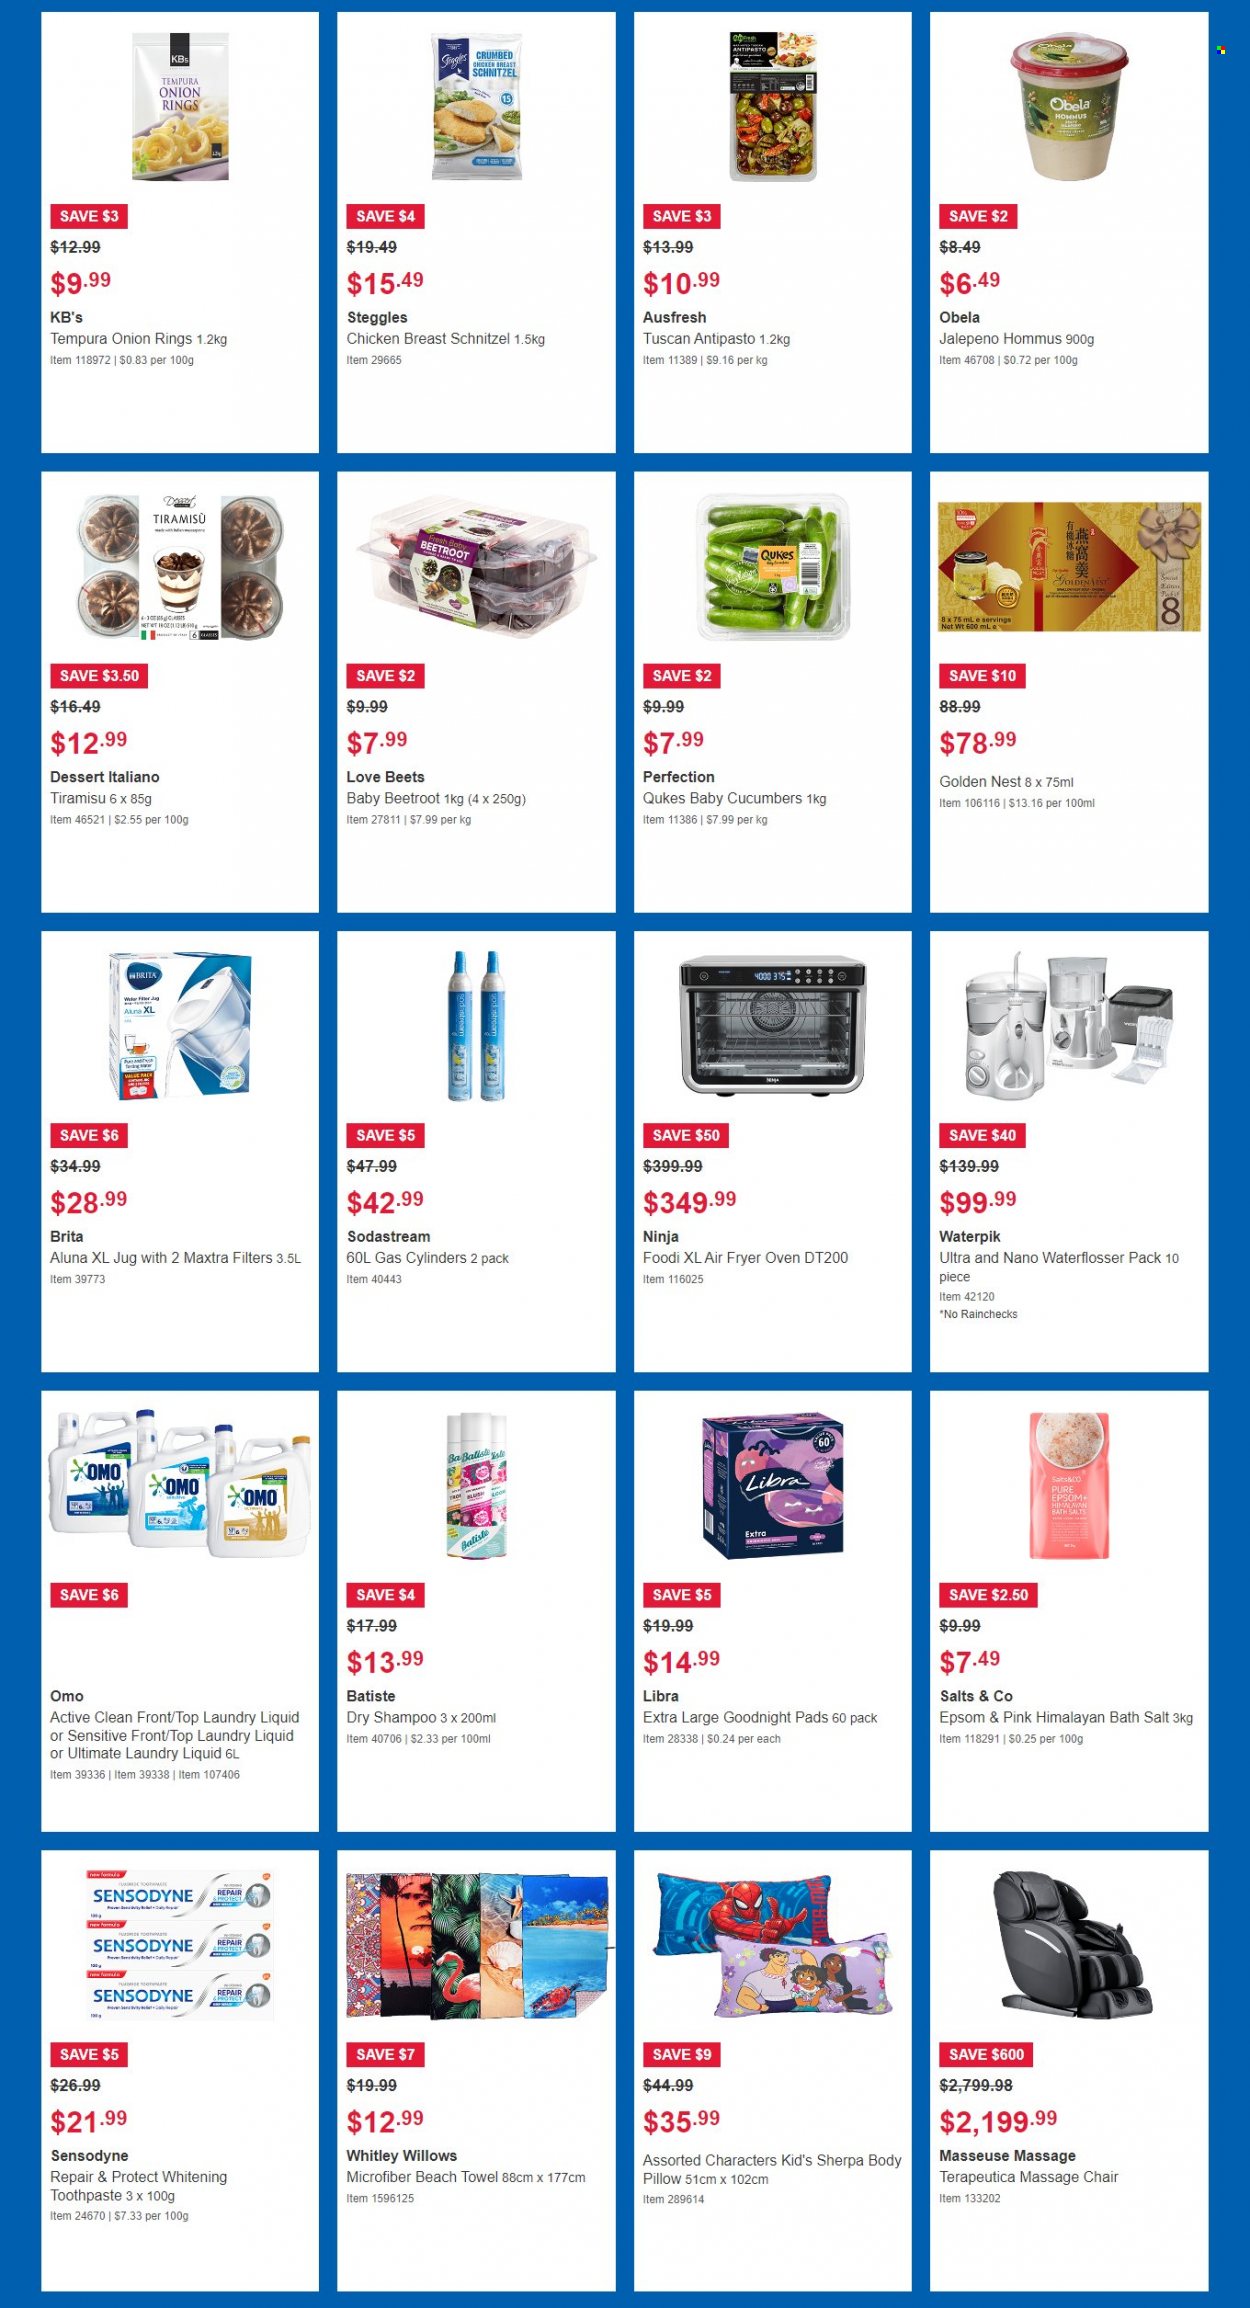 thumbnail - Costco Catalogue - 5 Dec 2022 - 18 Dec 2022 - Sales products - onion rings, beetroot, Omo, laundry detergent, bath salt, shampoo, toothpaste, Sensodyne, SodaStream, pillow, towel, beach towel, oven, massage chair, chair, vest, sherpa. Page 2.